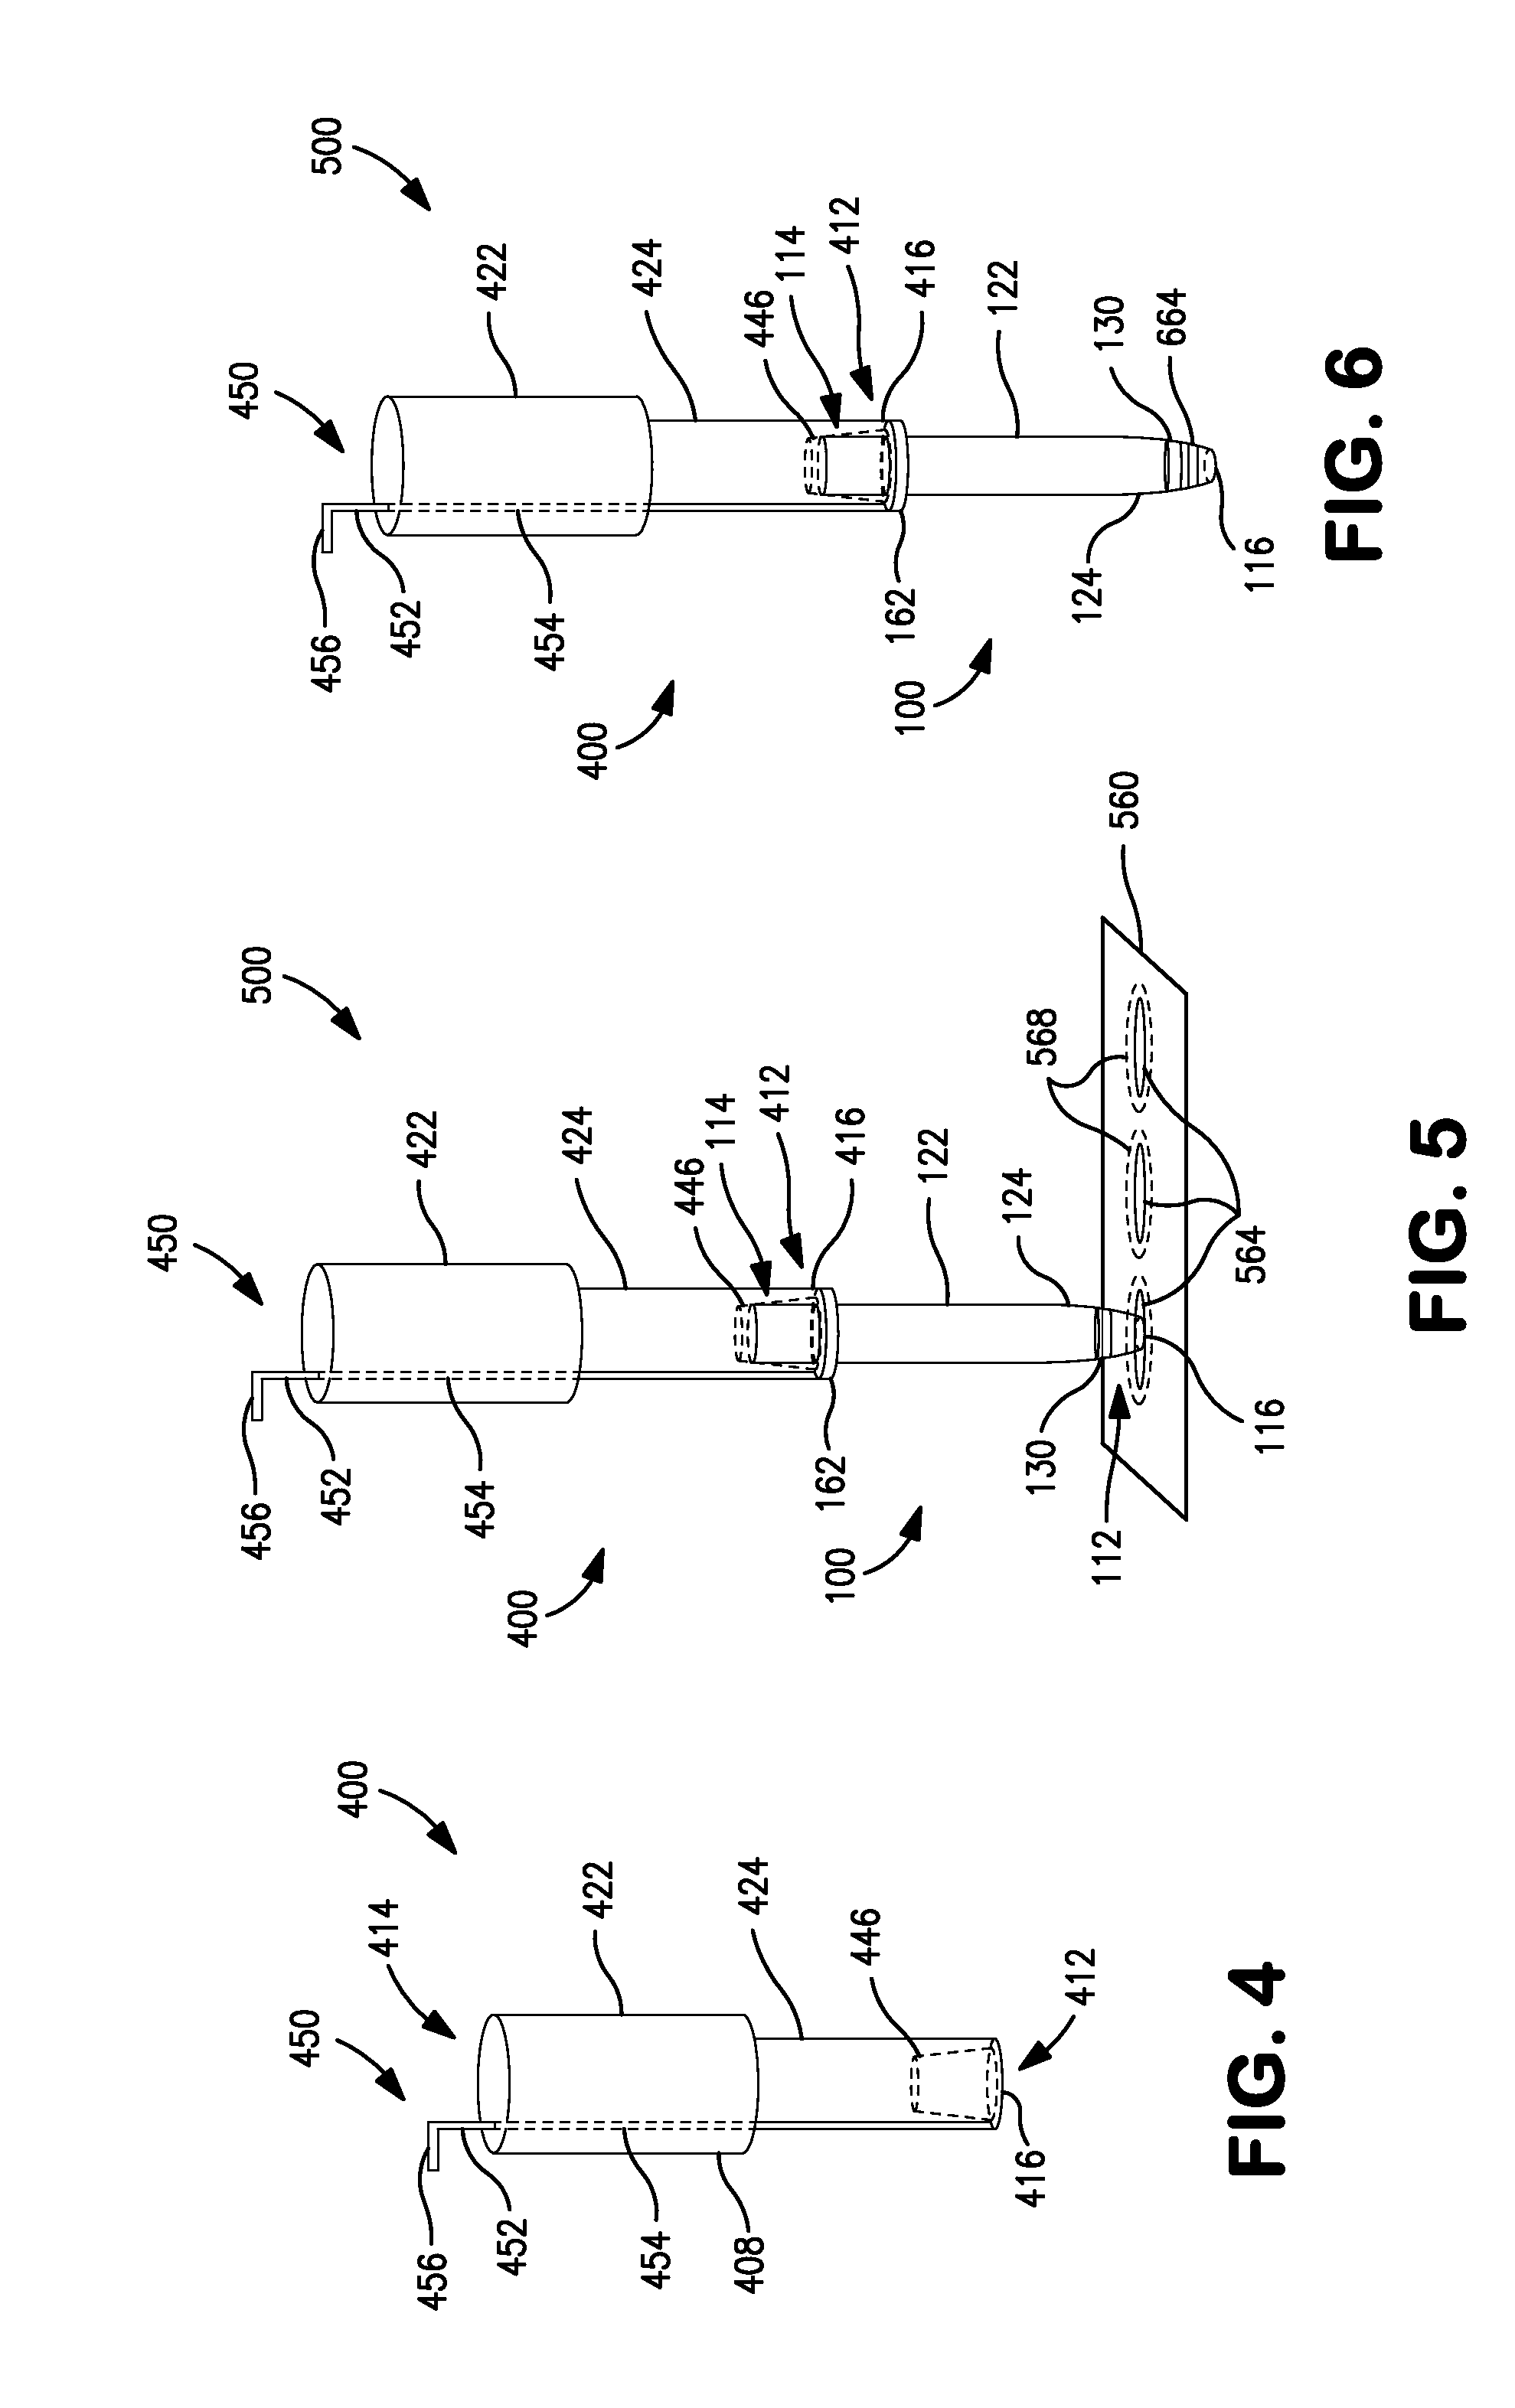 Dried biological fluid spot punch device and related methods